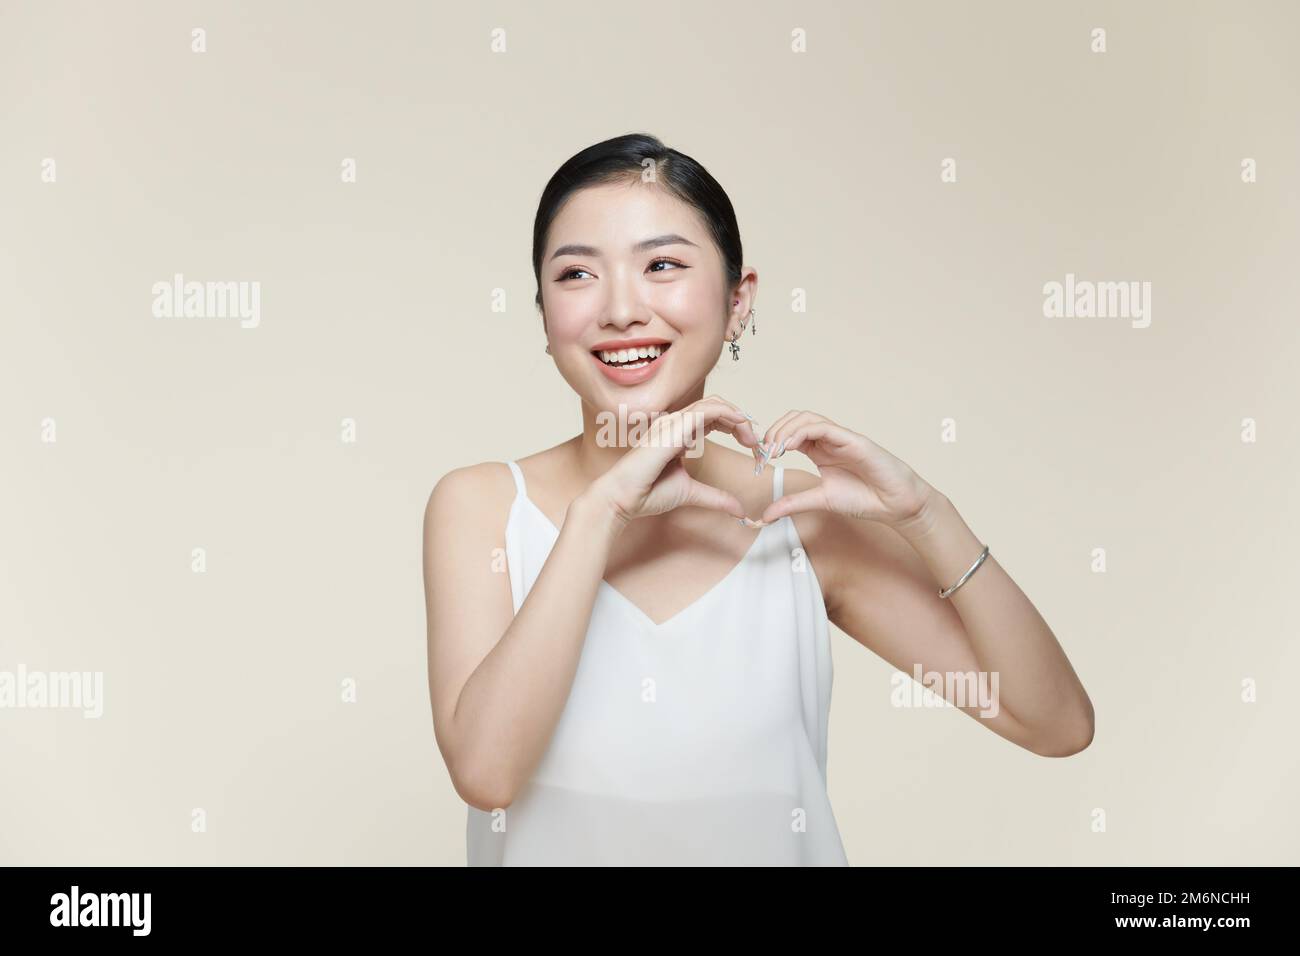 young pretty girl smiling and feeling happy, making heart shape with both hands Stock Photo